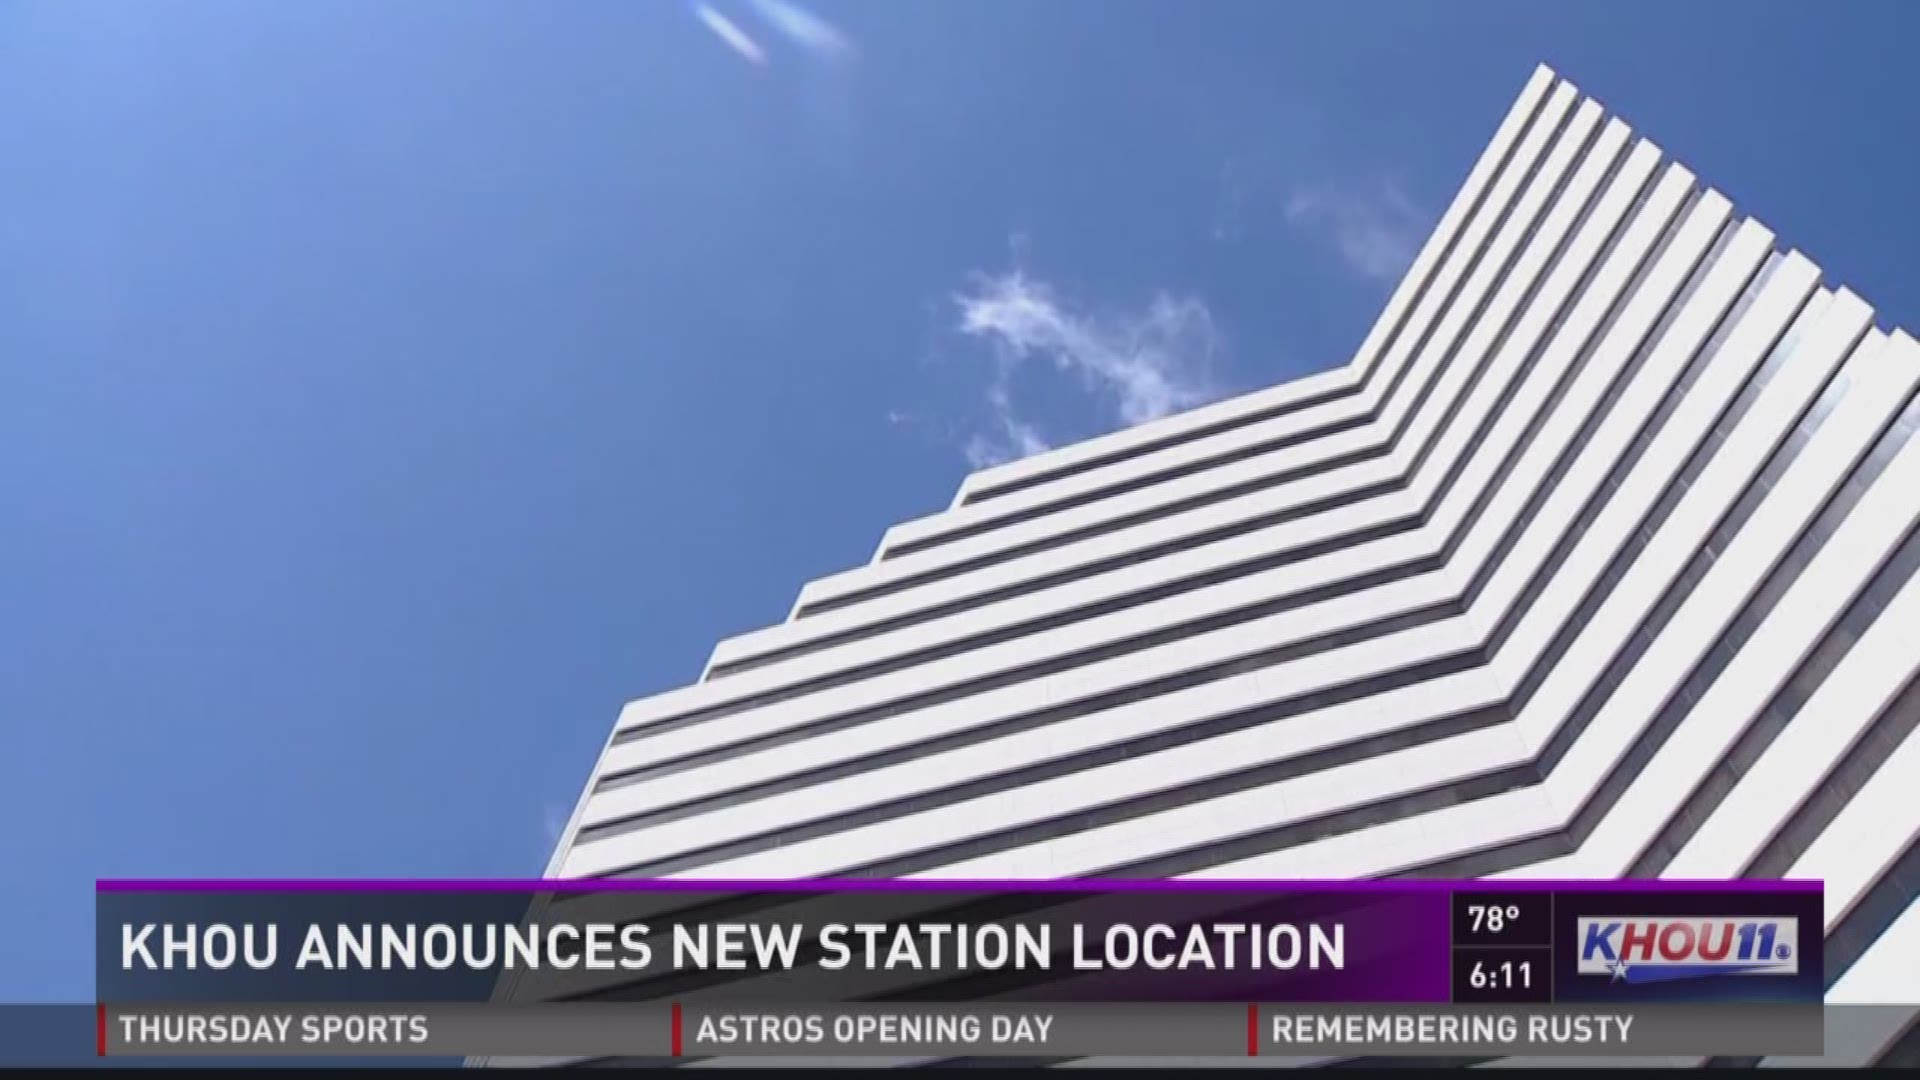 KHOU 11 announced on Thursday the location of their new station will be just west of the Galleria area on Westheimer Road.